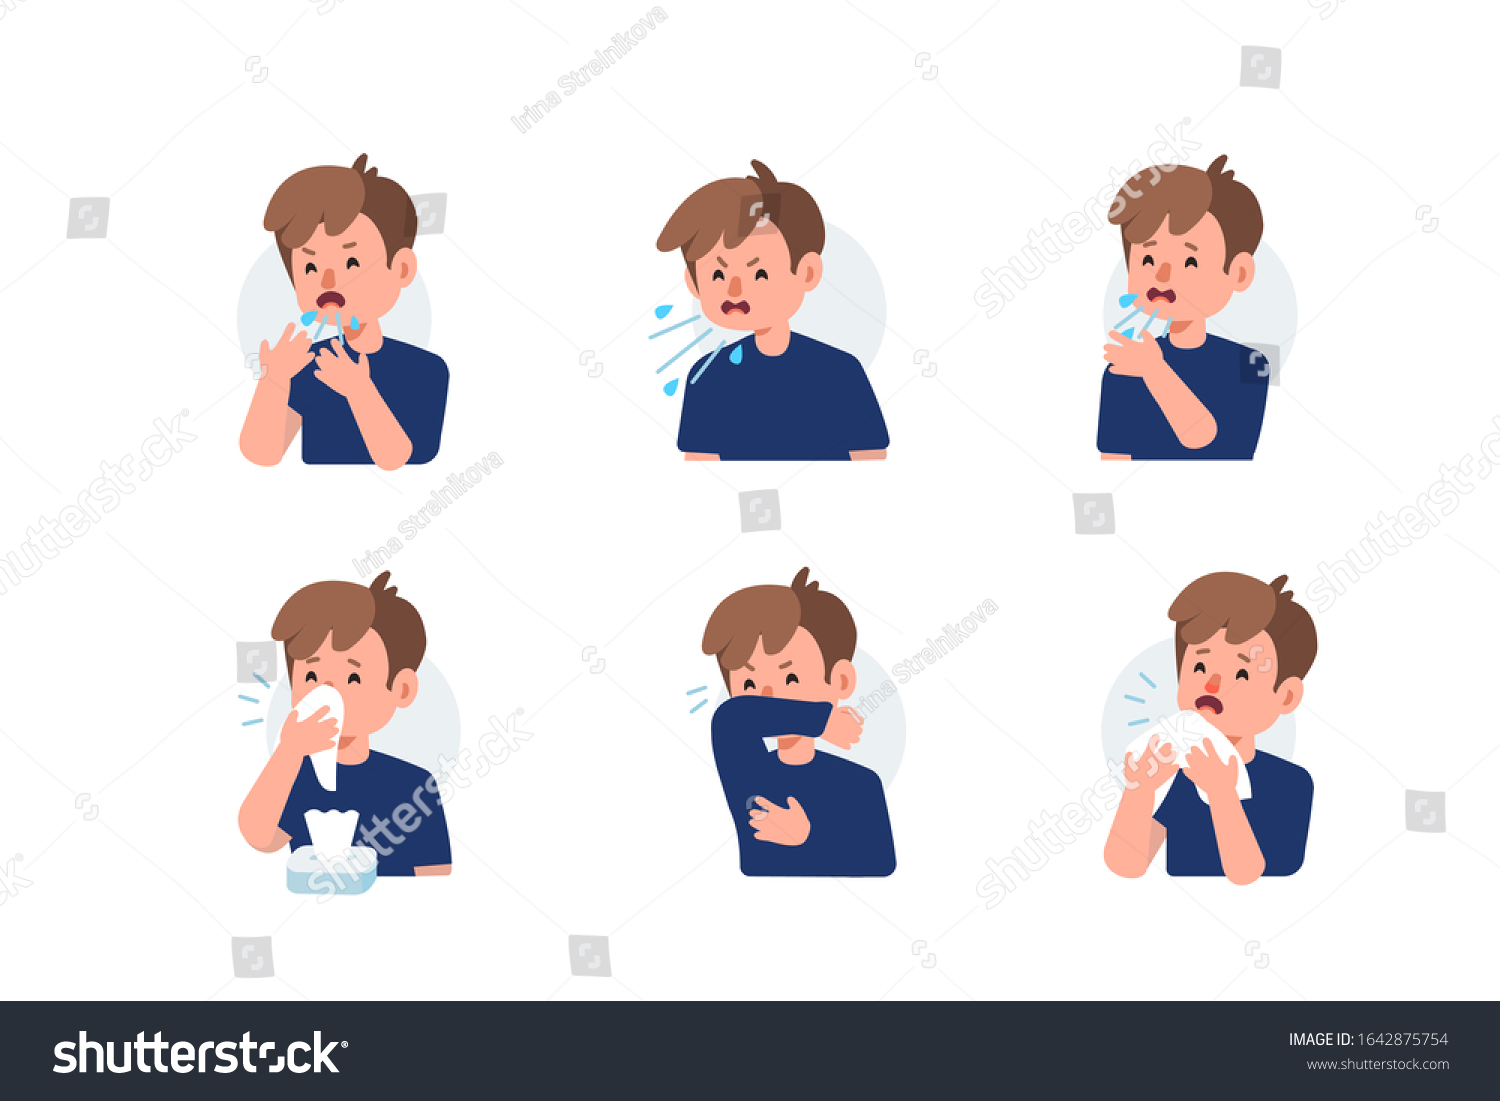 Kid Character Sneezing and Coughing Right and Wrong. Medical Recommendation How to Sneeze Properly. Prevention against Virus and Infection. Hygiene Concept.  Flat Cartoon Vector Illustration. #1642875754